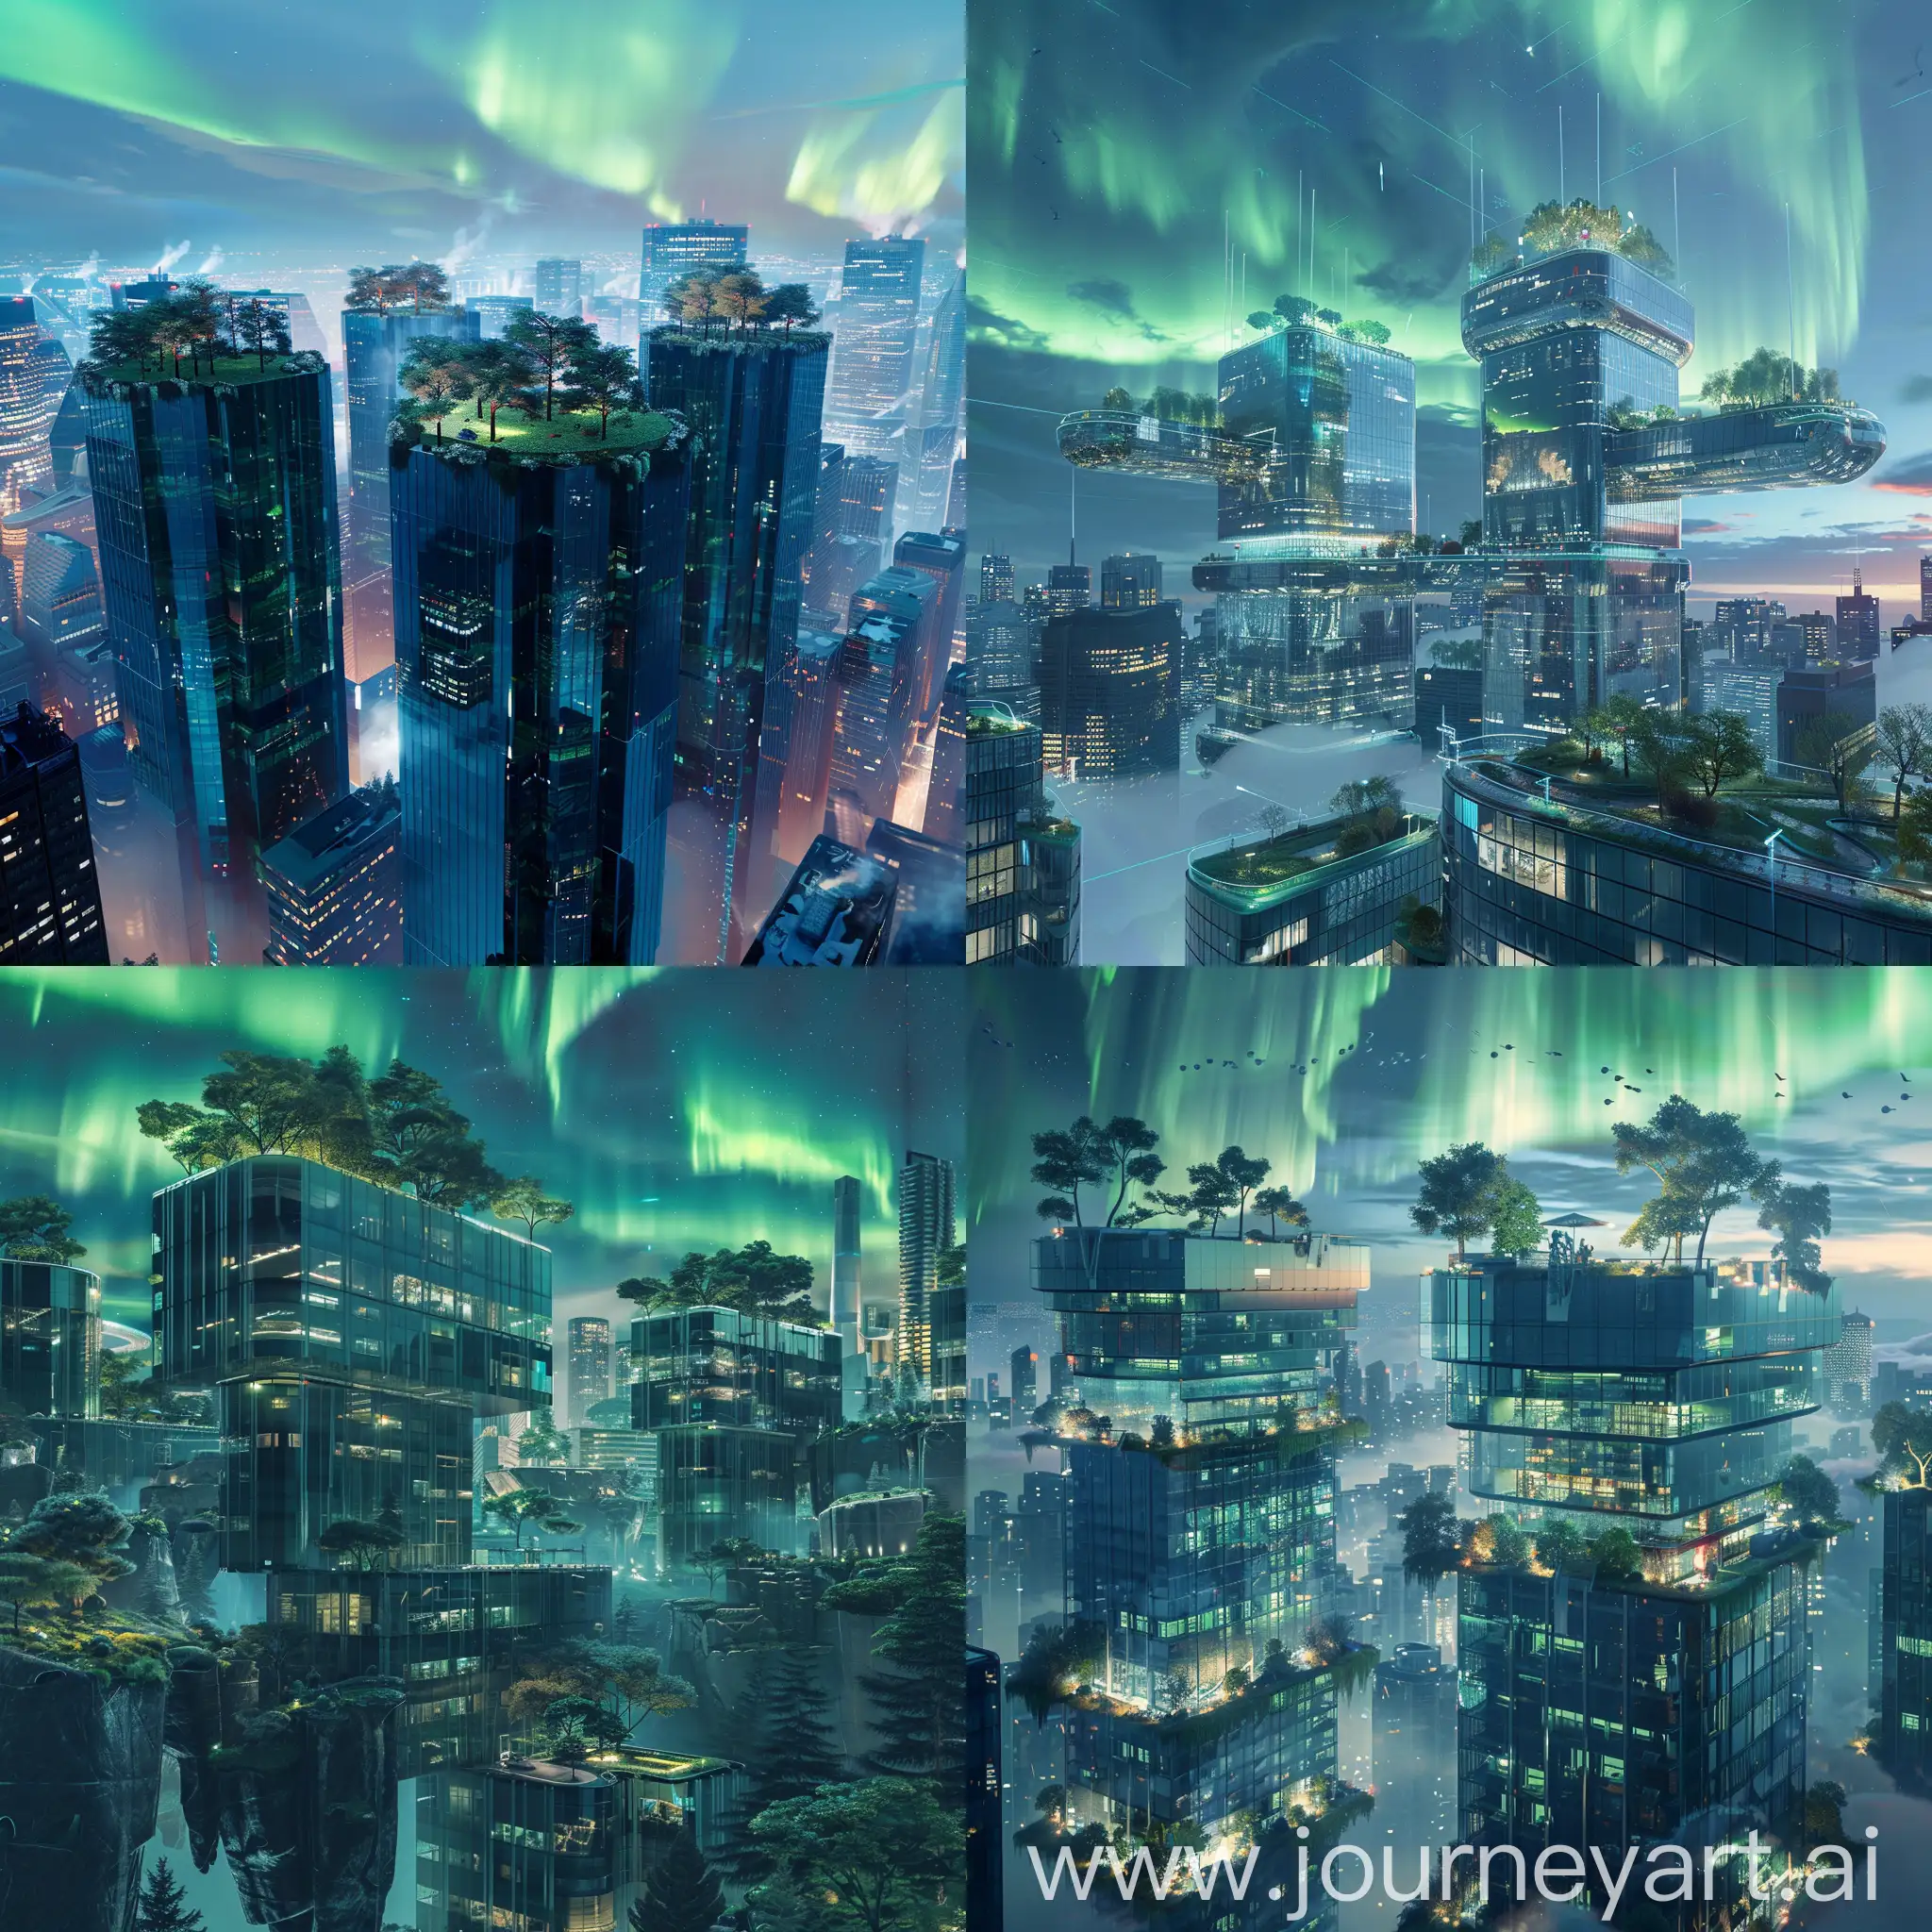 Photograph of a beautiful futuristic city of gigantic minimalist glass skyscrapers, parks on top of buildings, northern lights